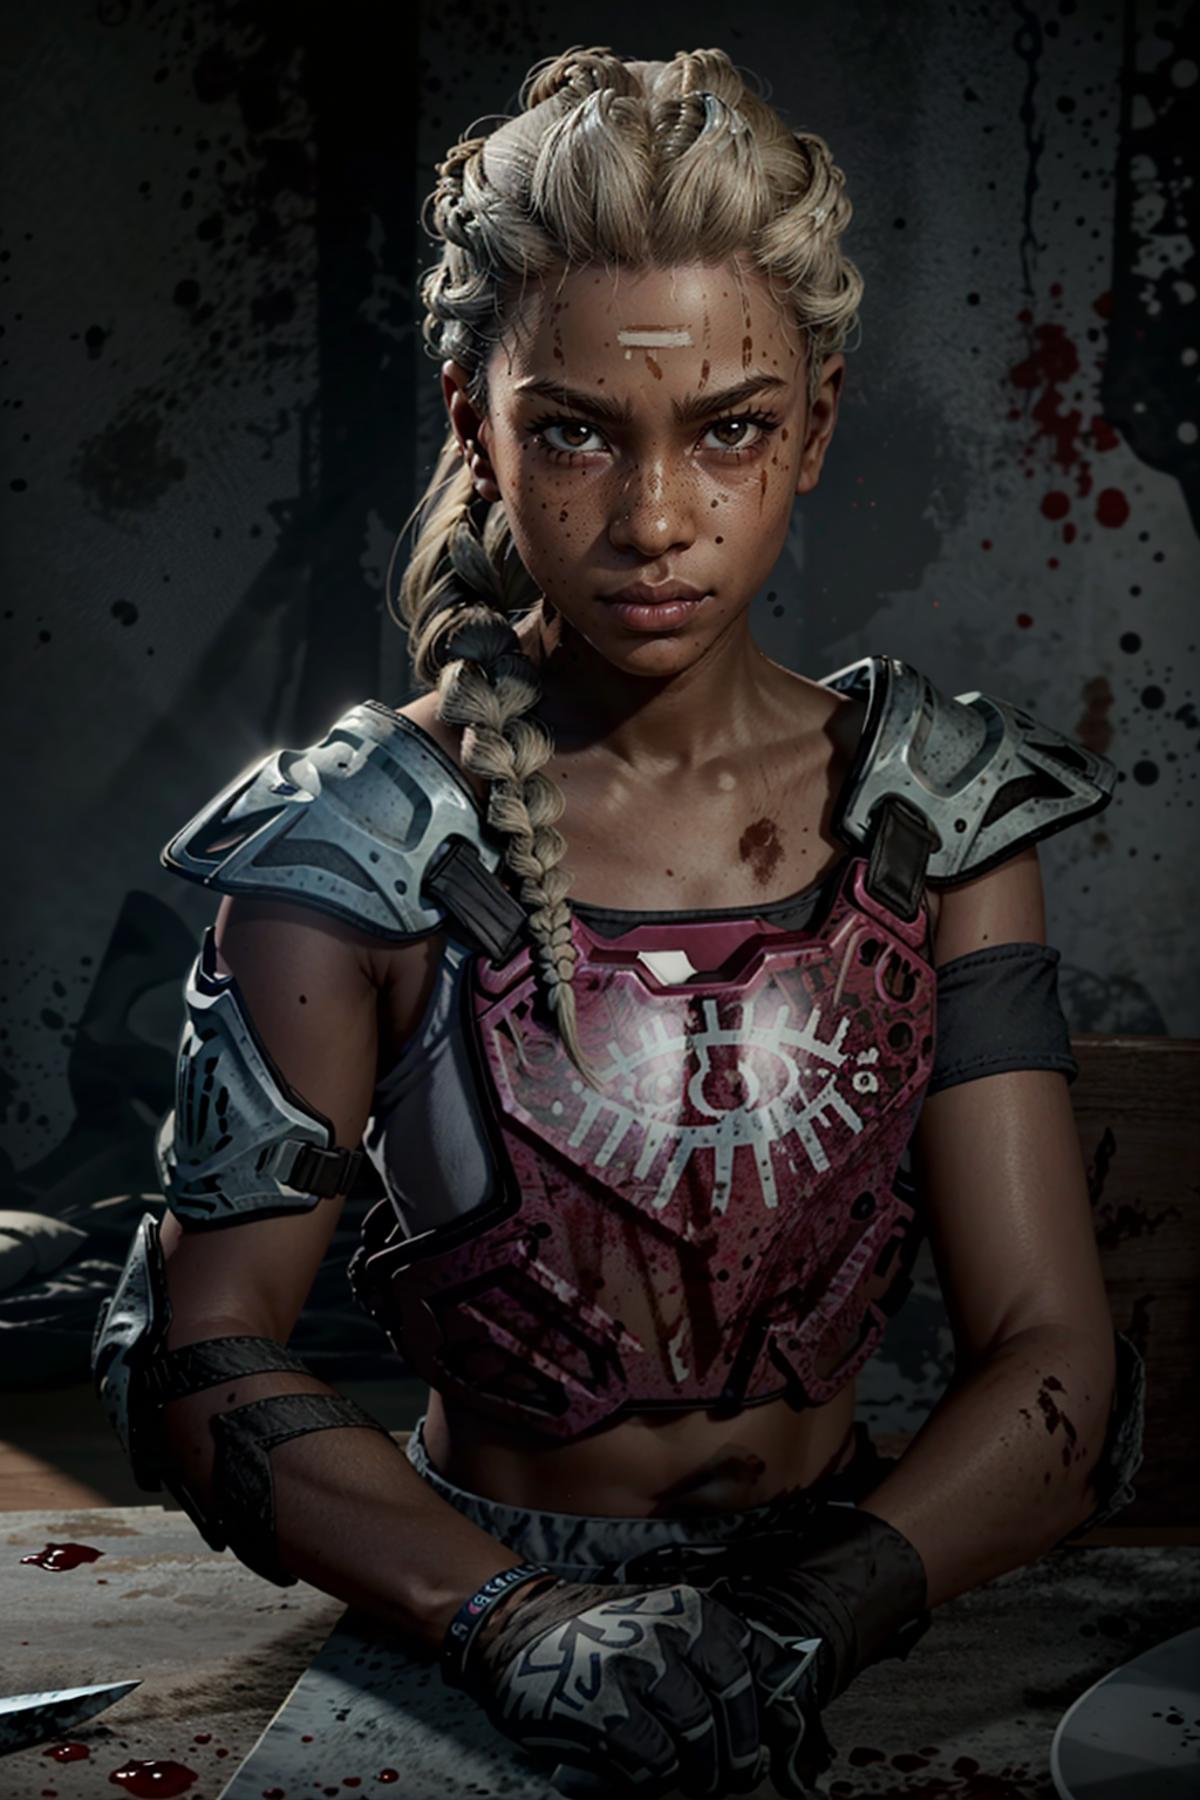 Lou from Far Cry New Dawn image by BloodRedKittie